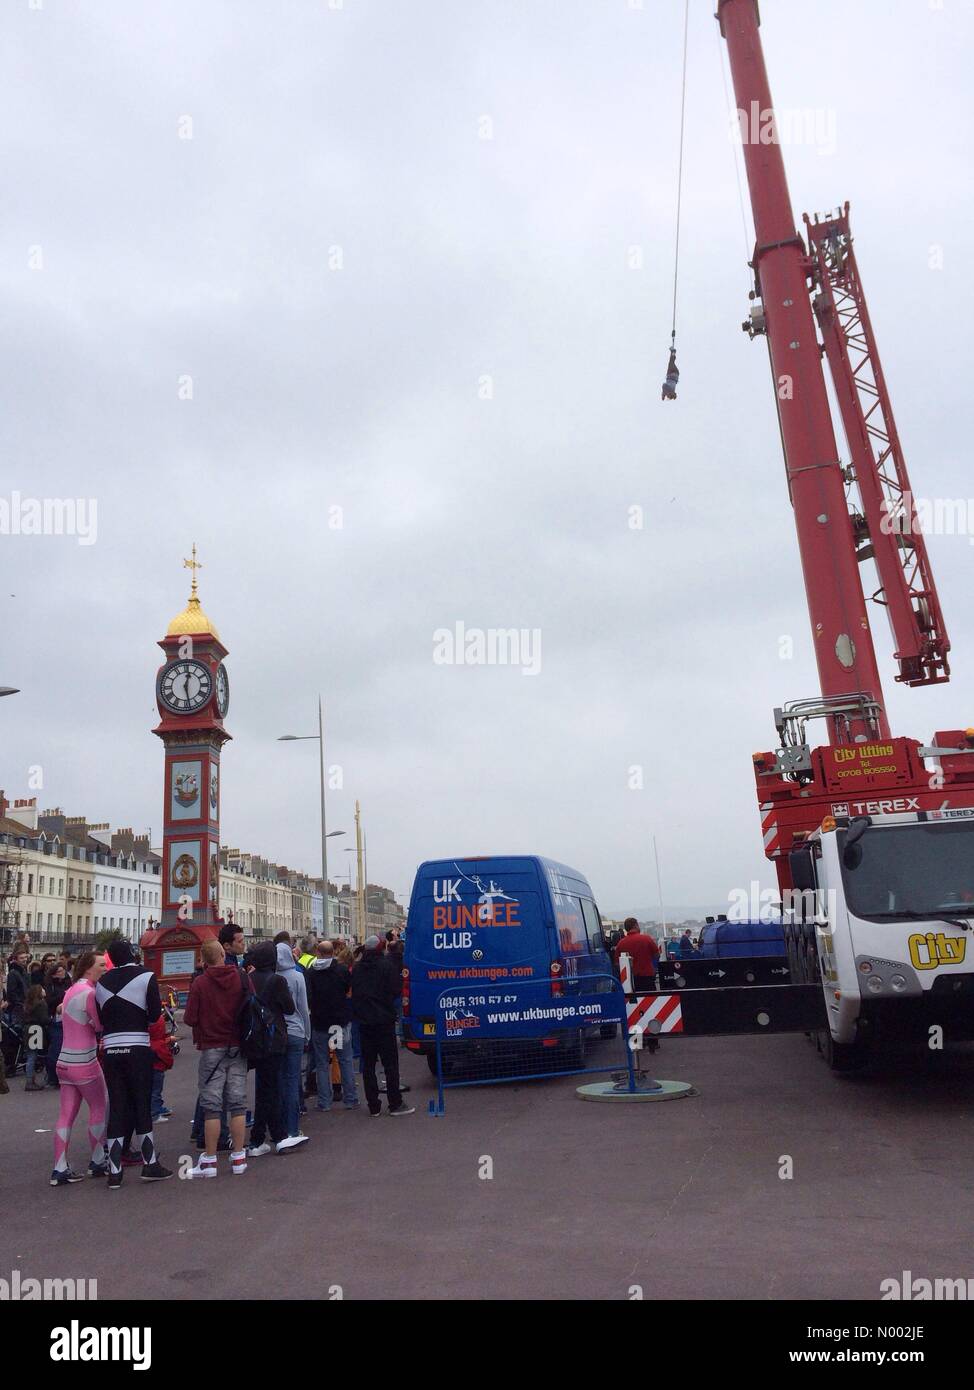 Weymouth, Dorset, UK. 02nd May, 2015. As part of the Weymouth Kite Festival for the first time jumpers, including members of the Dorset Blind Society, take part in a charity UK bungee from The Clock Tower at Weymouth. Credit:  Carolyn Jenkins/StockimoNews/Alamy Live News Stock Photo